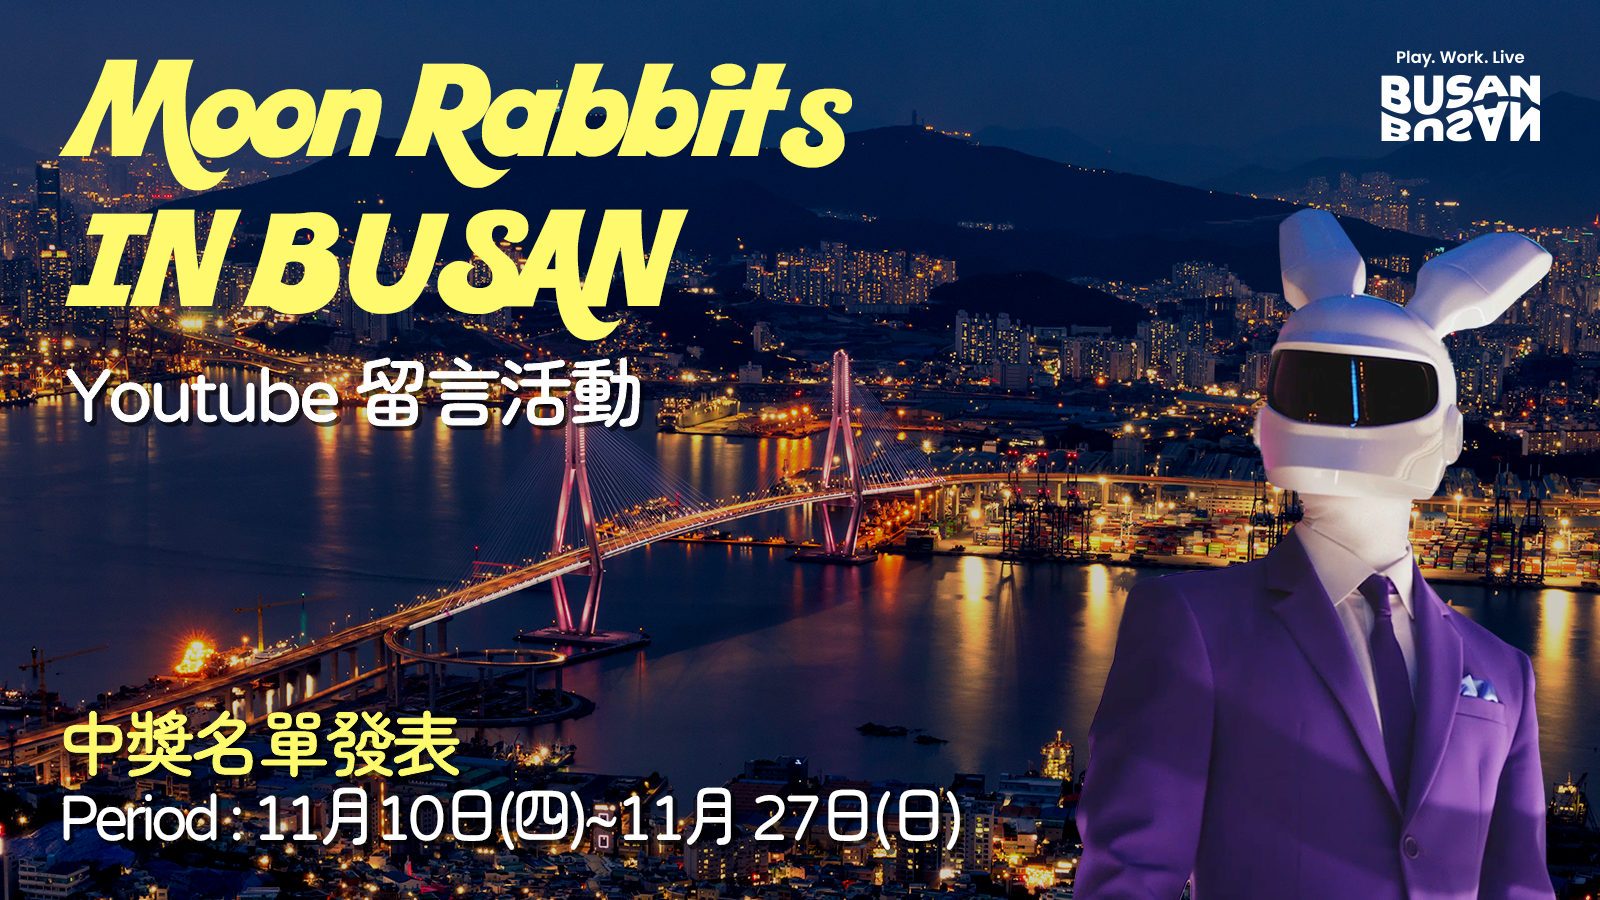 Winners Announcement for Moon Rabbits in Busan Youtube Teaser Event